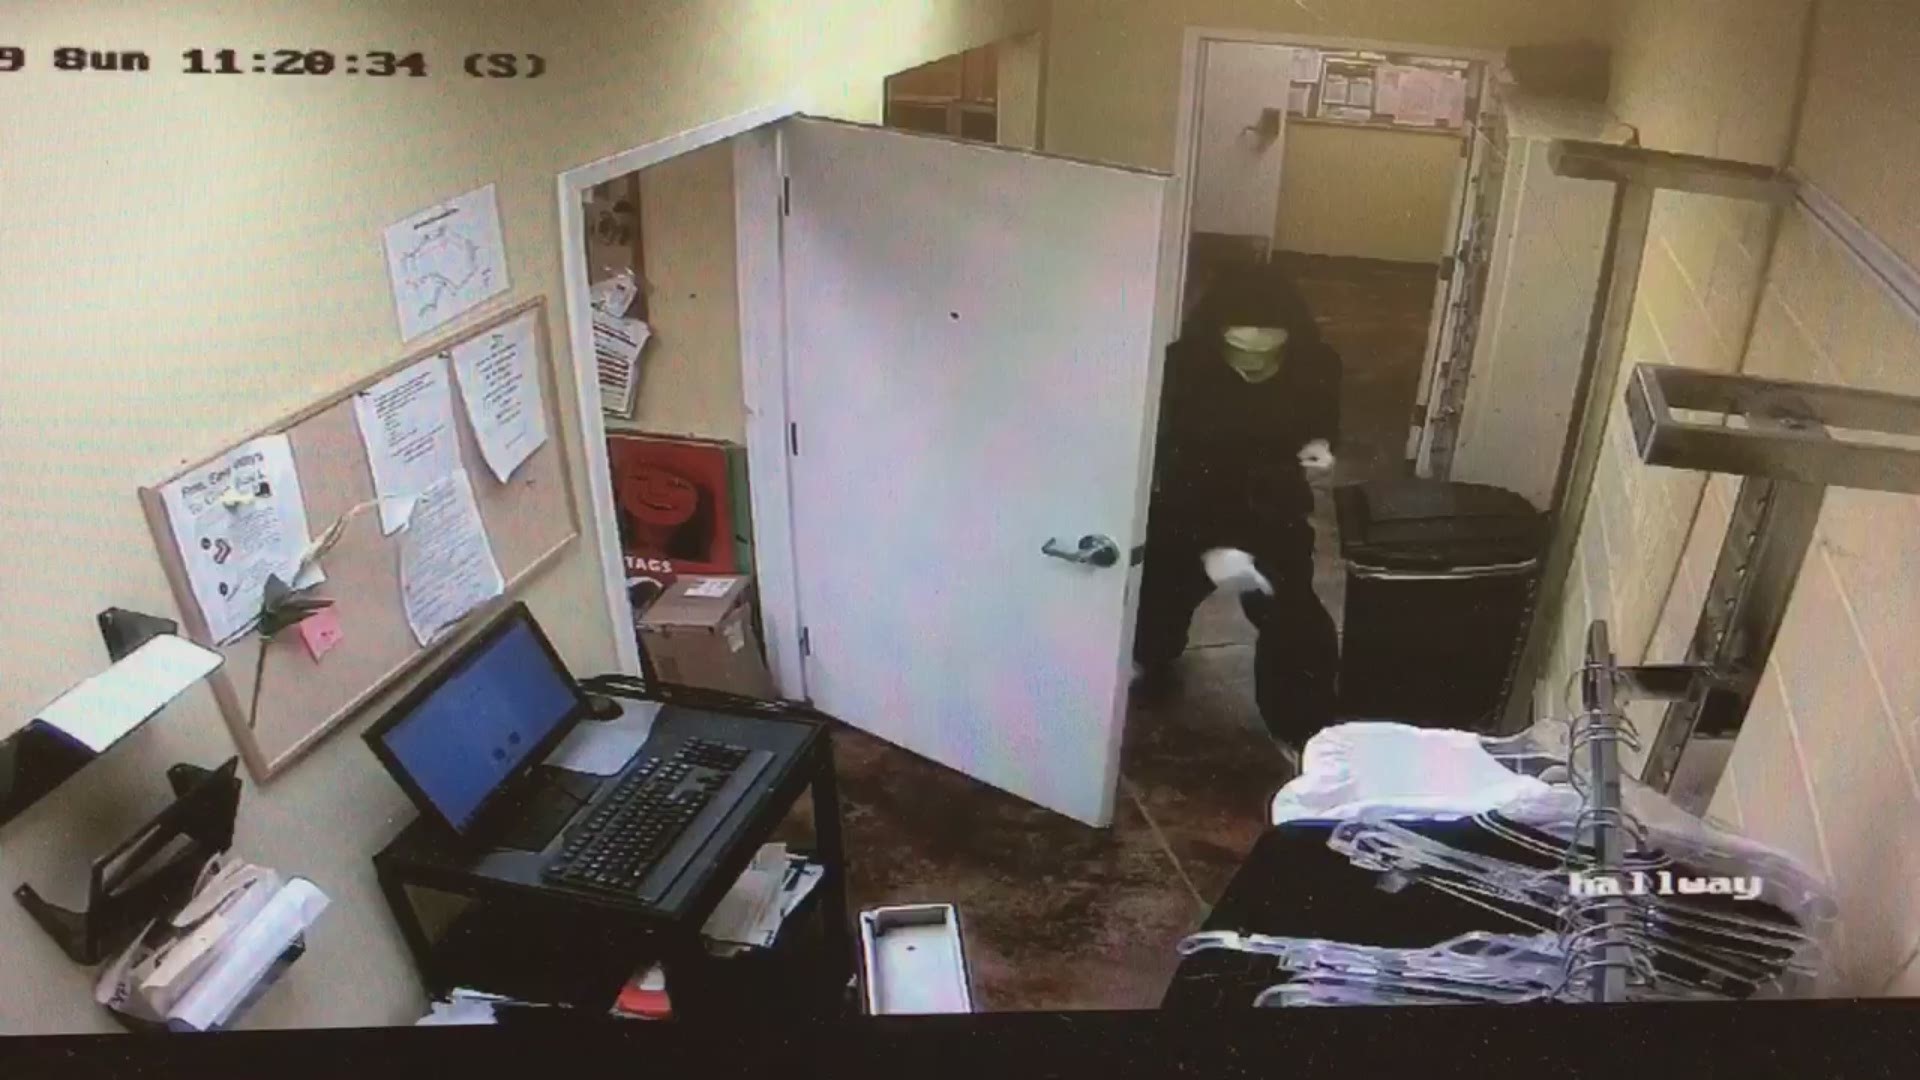 The Bibb County Sheriff's Office says they're looking for a suspect in an armed robbery that happened at the Goodwill on Zebulon Road Sunday morning. Here's security cam footage of the suspect.